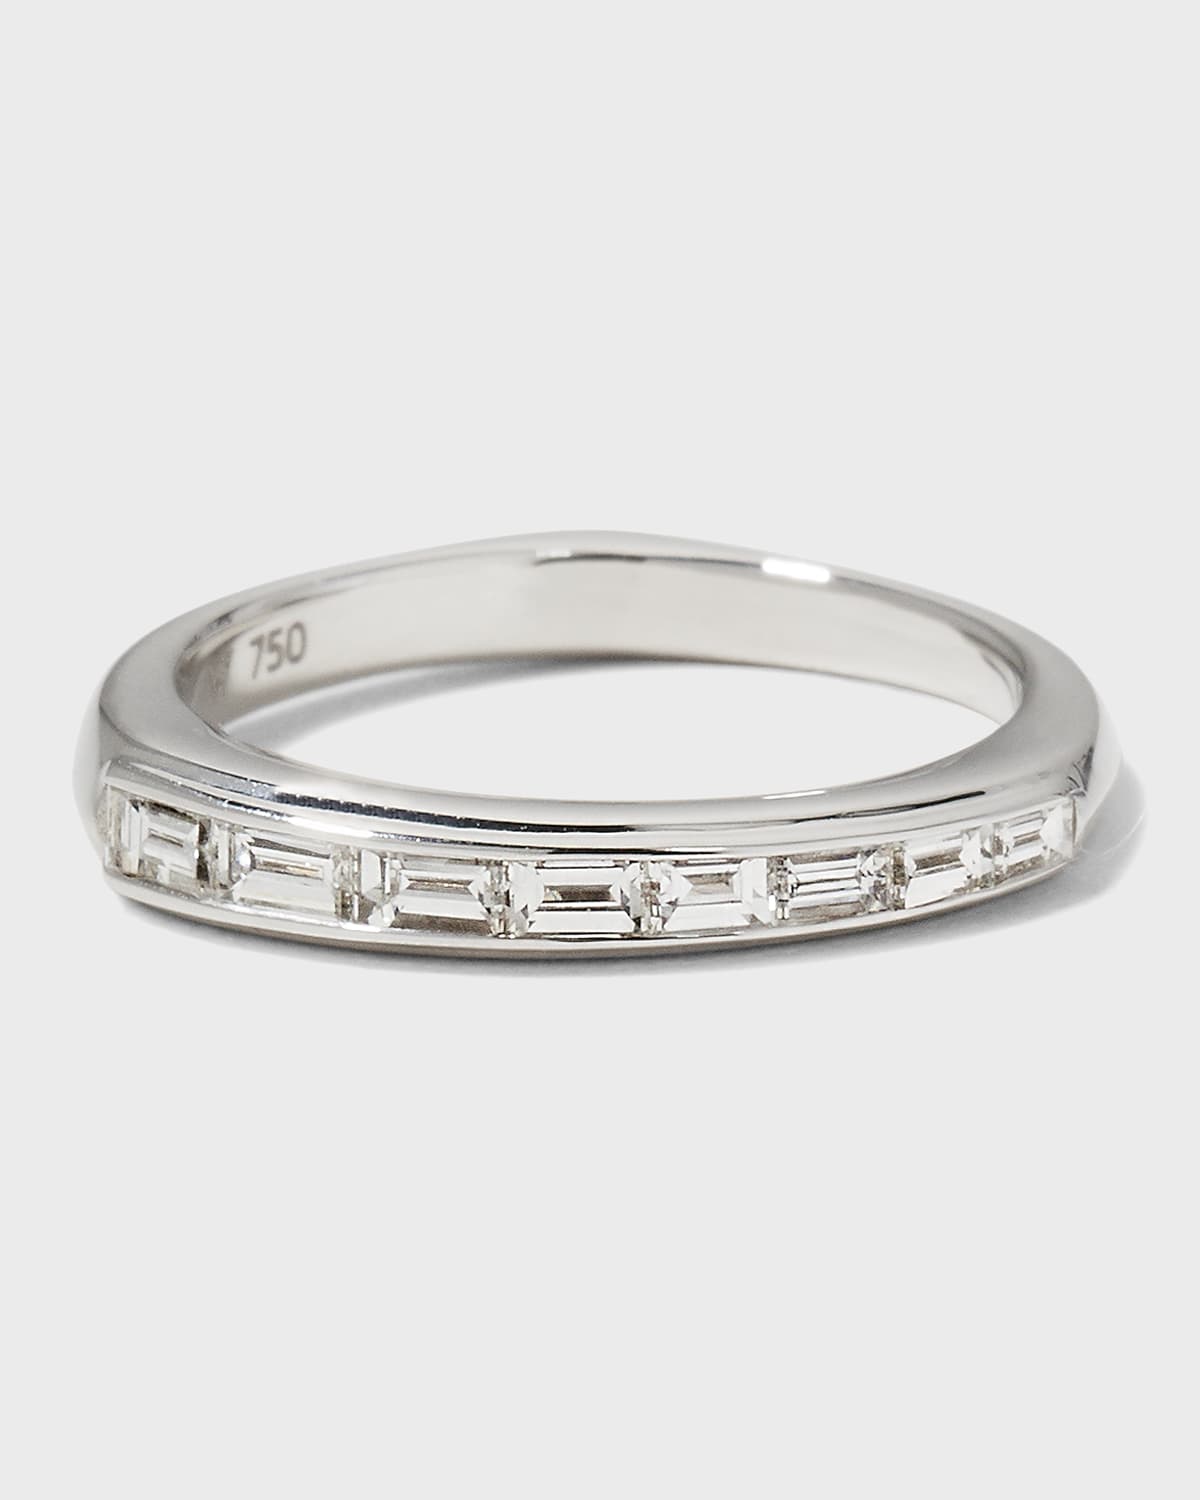 Stephen Webster Baguette Stack Ring With Diamonds And White Gold